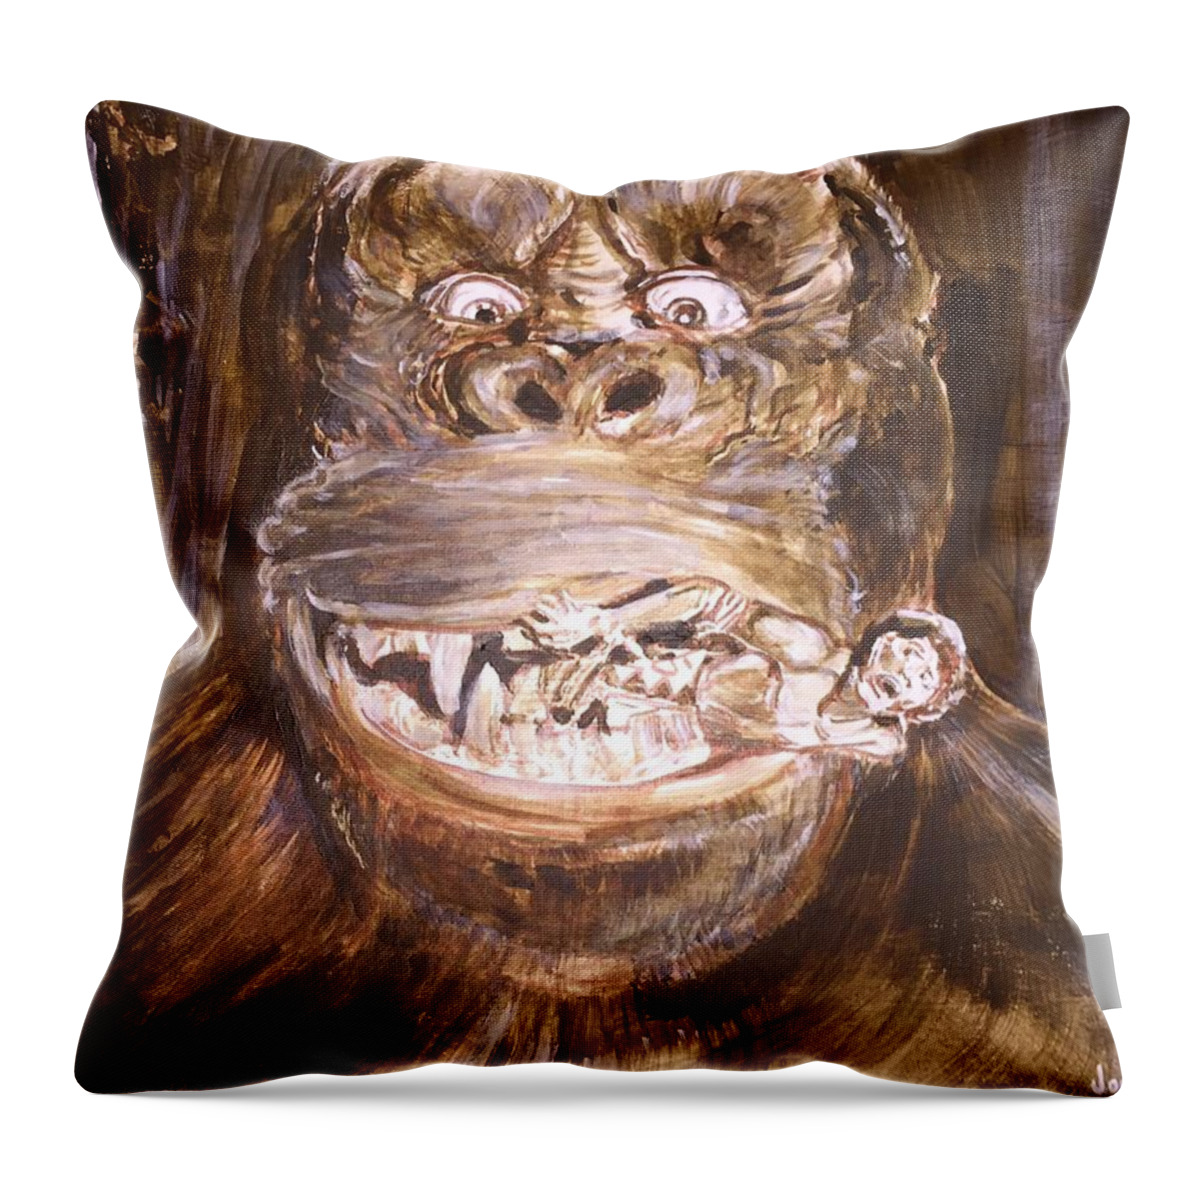 King Kong 1933 Bruce Cabot Robert Armstrong Fay Wray Creature Features Rko Radio Pictures Silver Screen Throw Pillow featuring the painting King Kong - Deleted Scene - Kong With Native by Jonathan Morrill